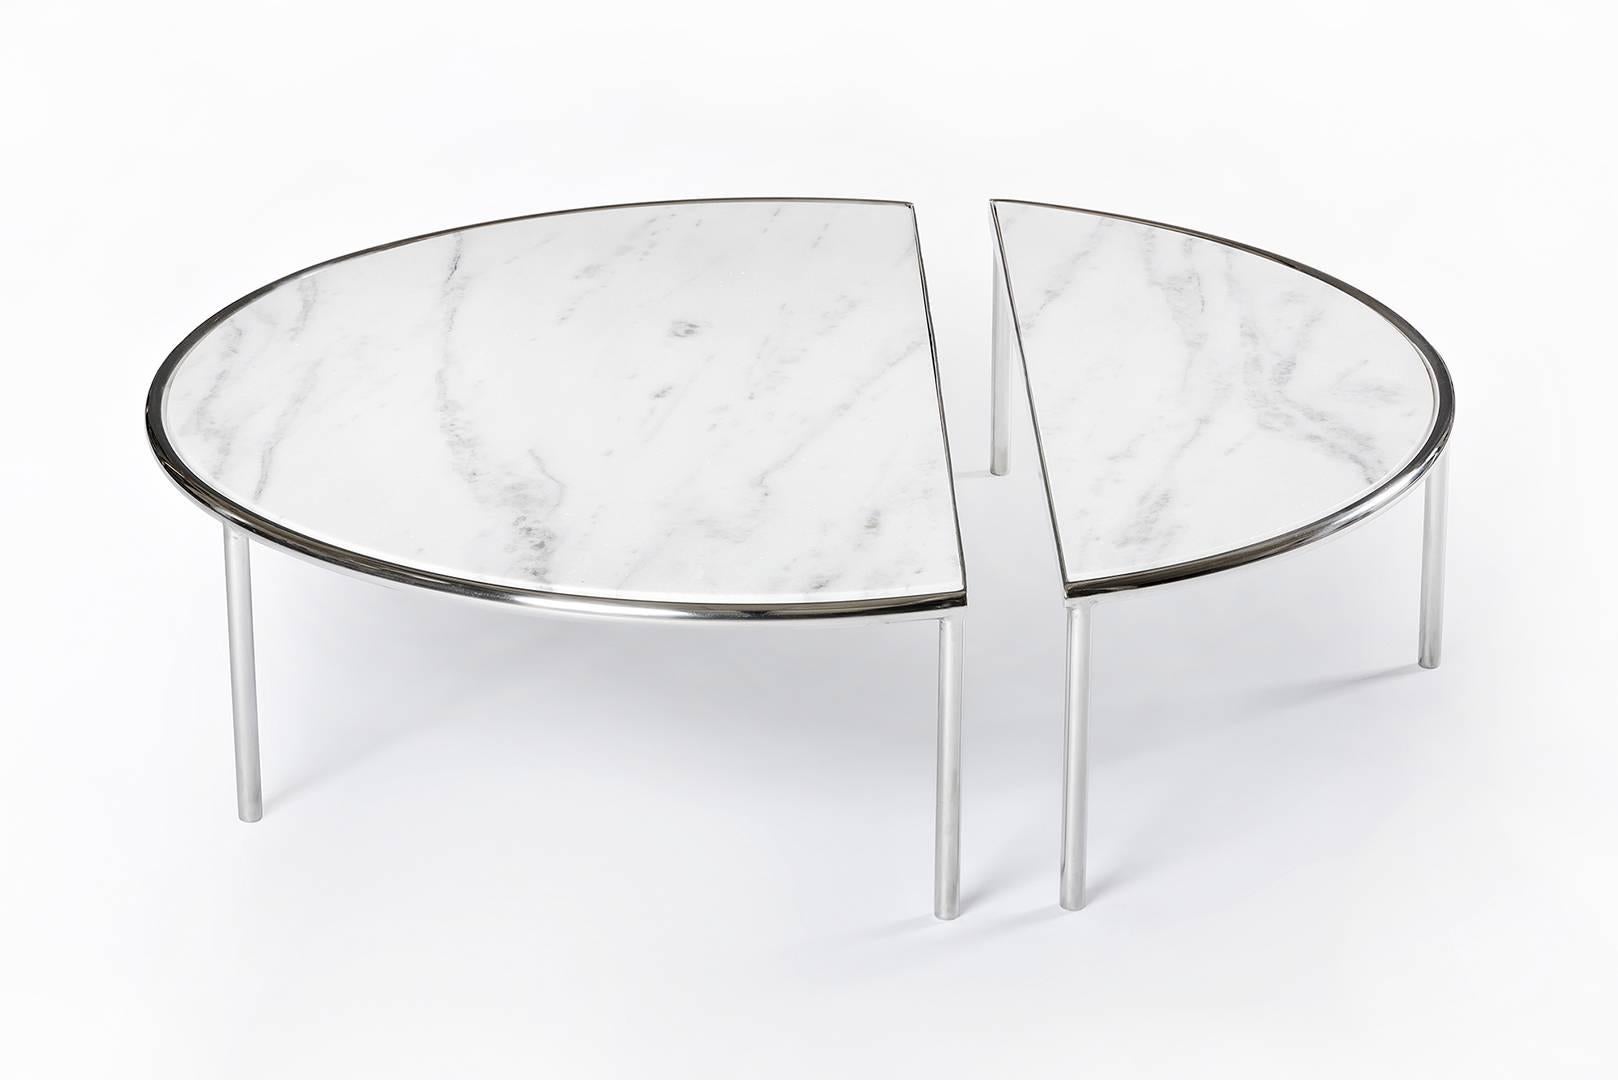 Split tables are the result of a subtle intervention in simple geometric forms. A circle and a square are cut, creating tables composed of two independent parts that visually maintains its unity.

The gesture attributes possibilities of